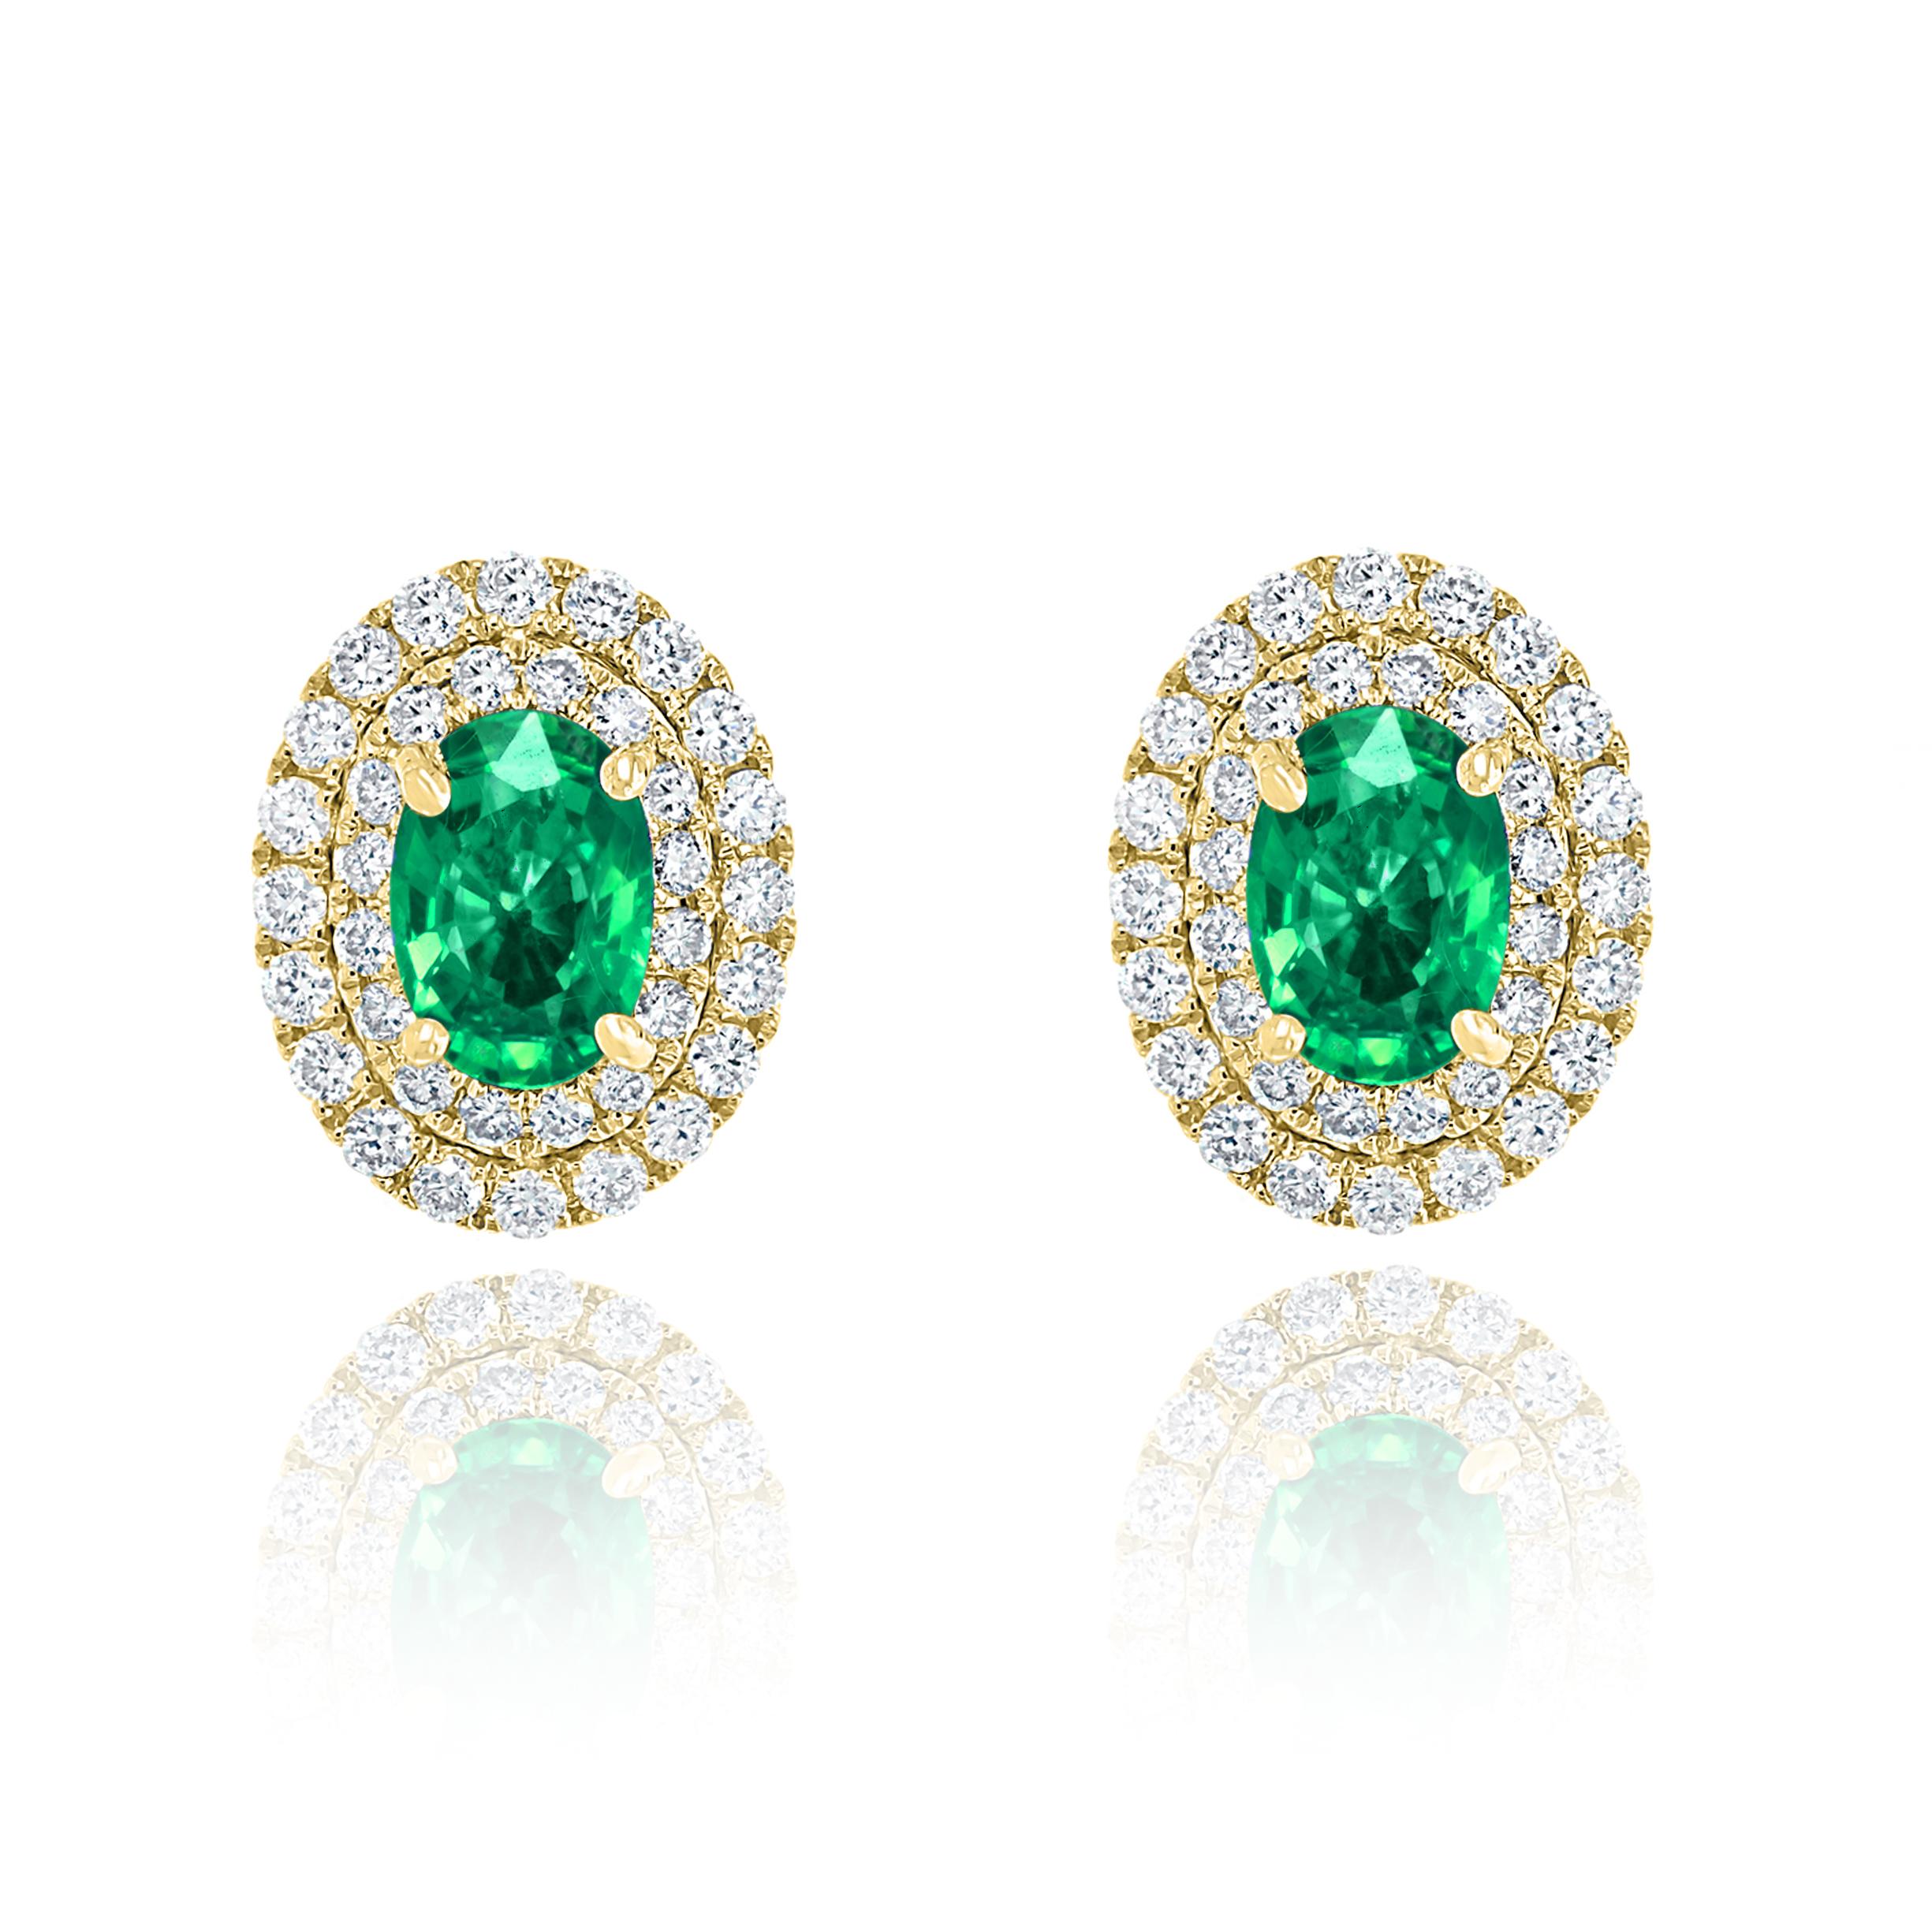 A simple pair of stud earrings showcasing 0.89 carats of oval cut emeralds, surrounded by a double row of 72 brilliant round diamonds weighing 0.48 carats and made in 18-karat yellow gold.